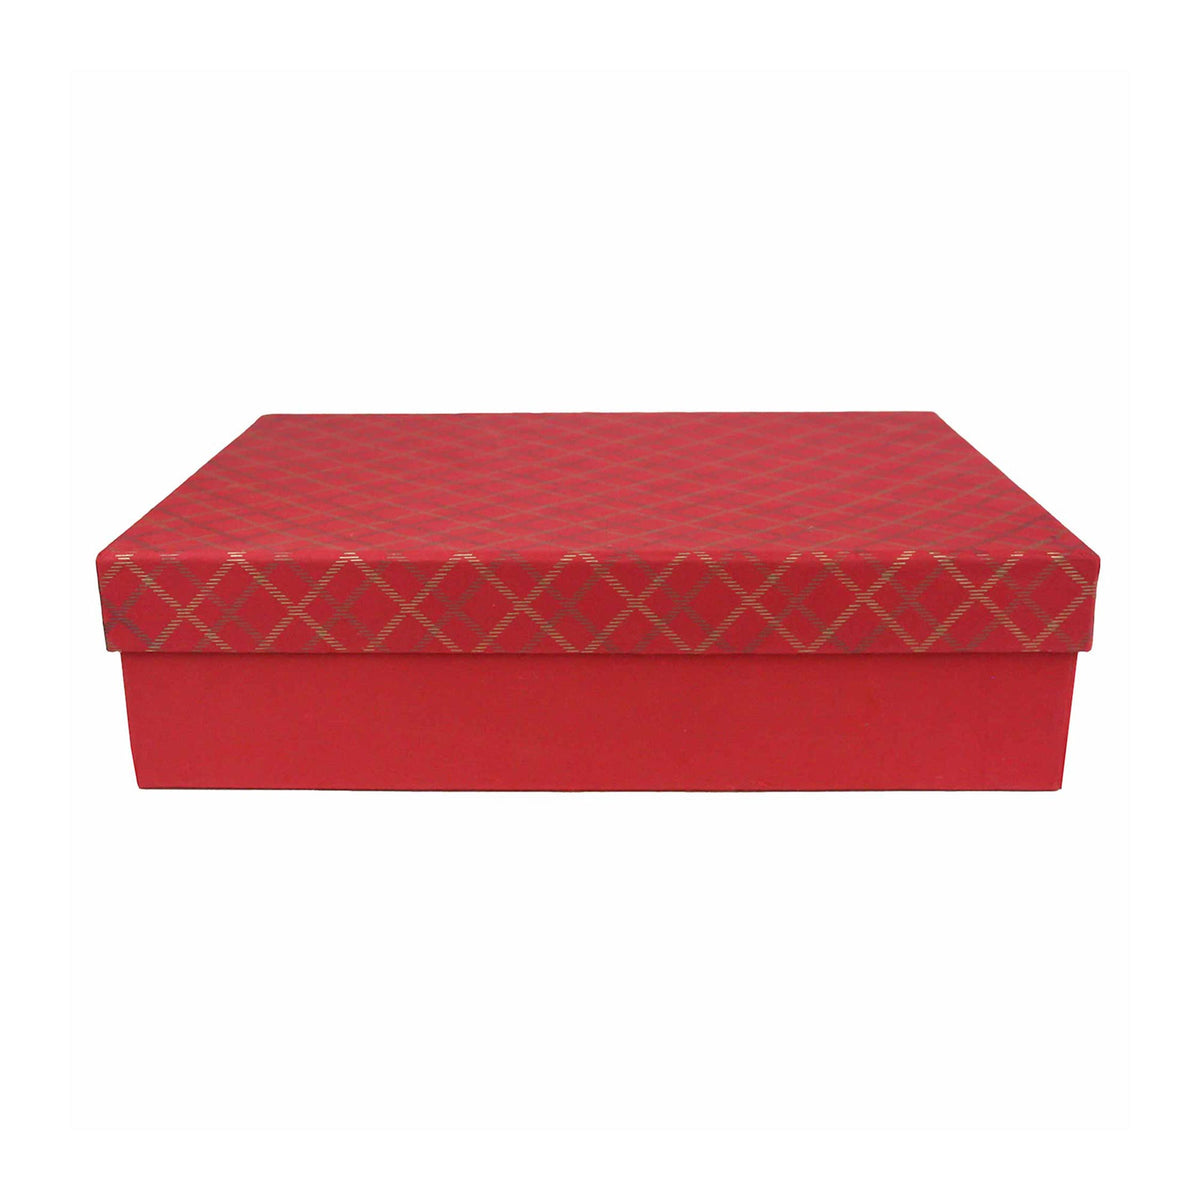 Single Handmade Red Chequered Gift Boxes